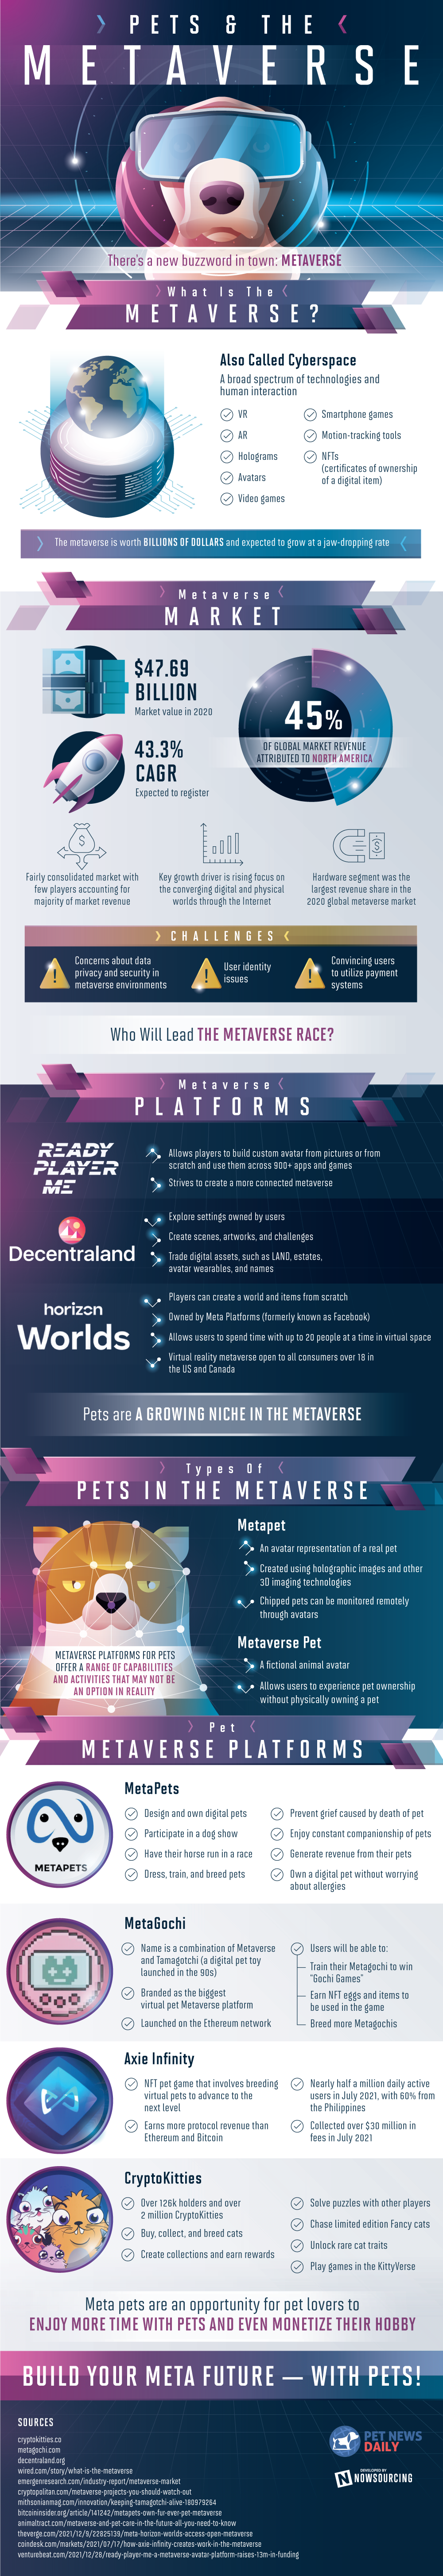 pets and the metaverse infographic